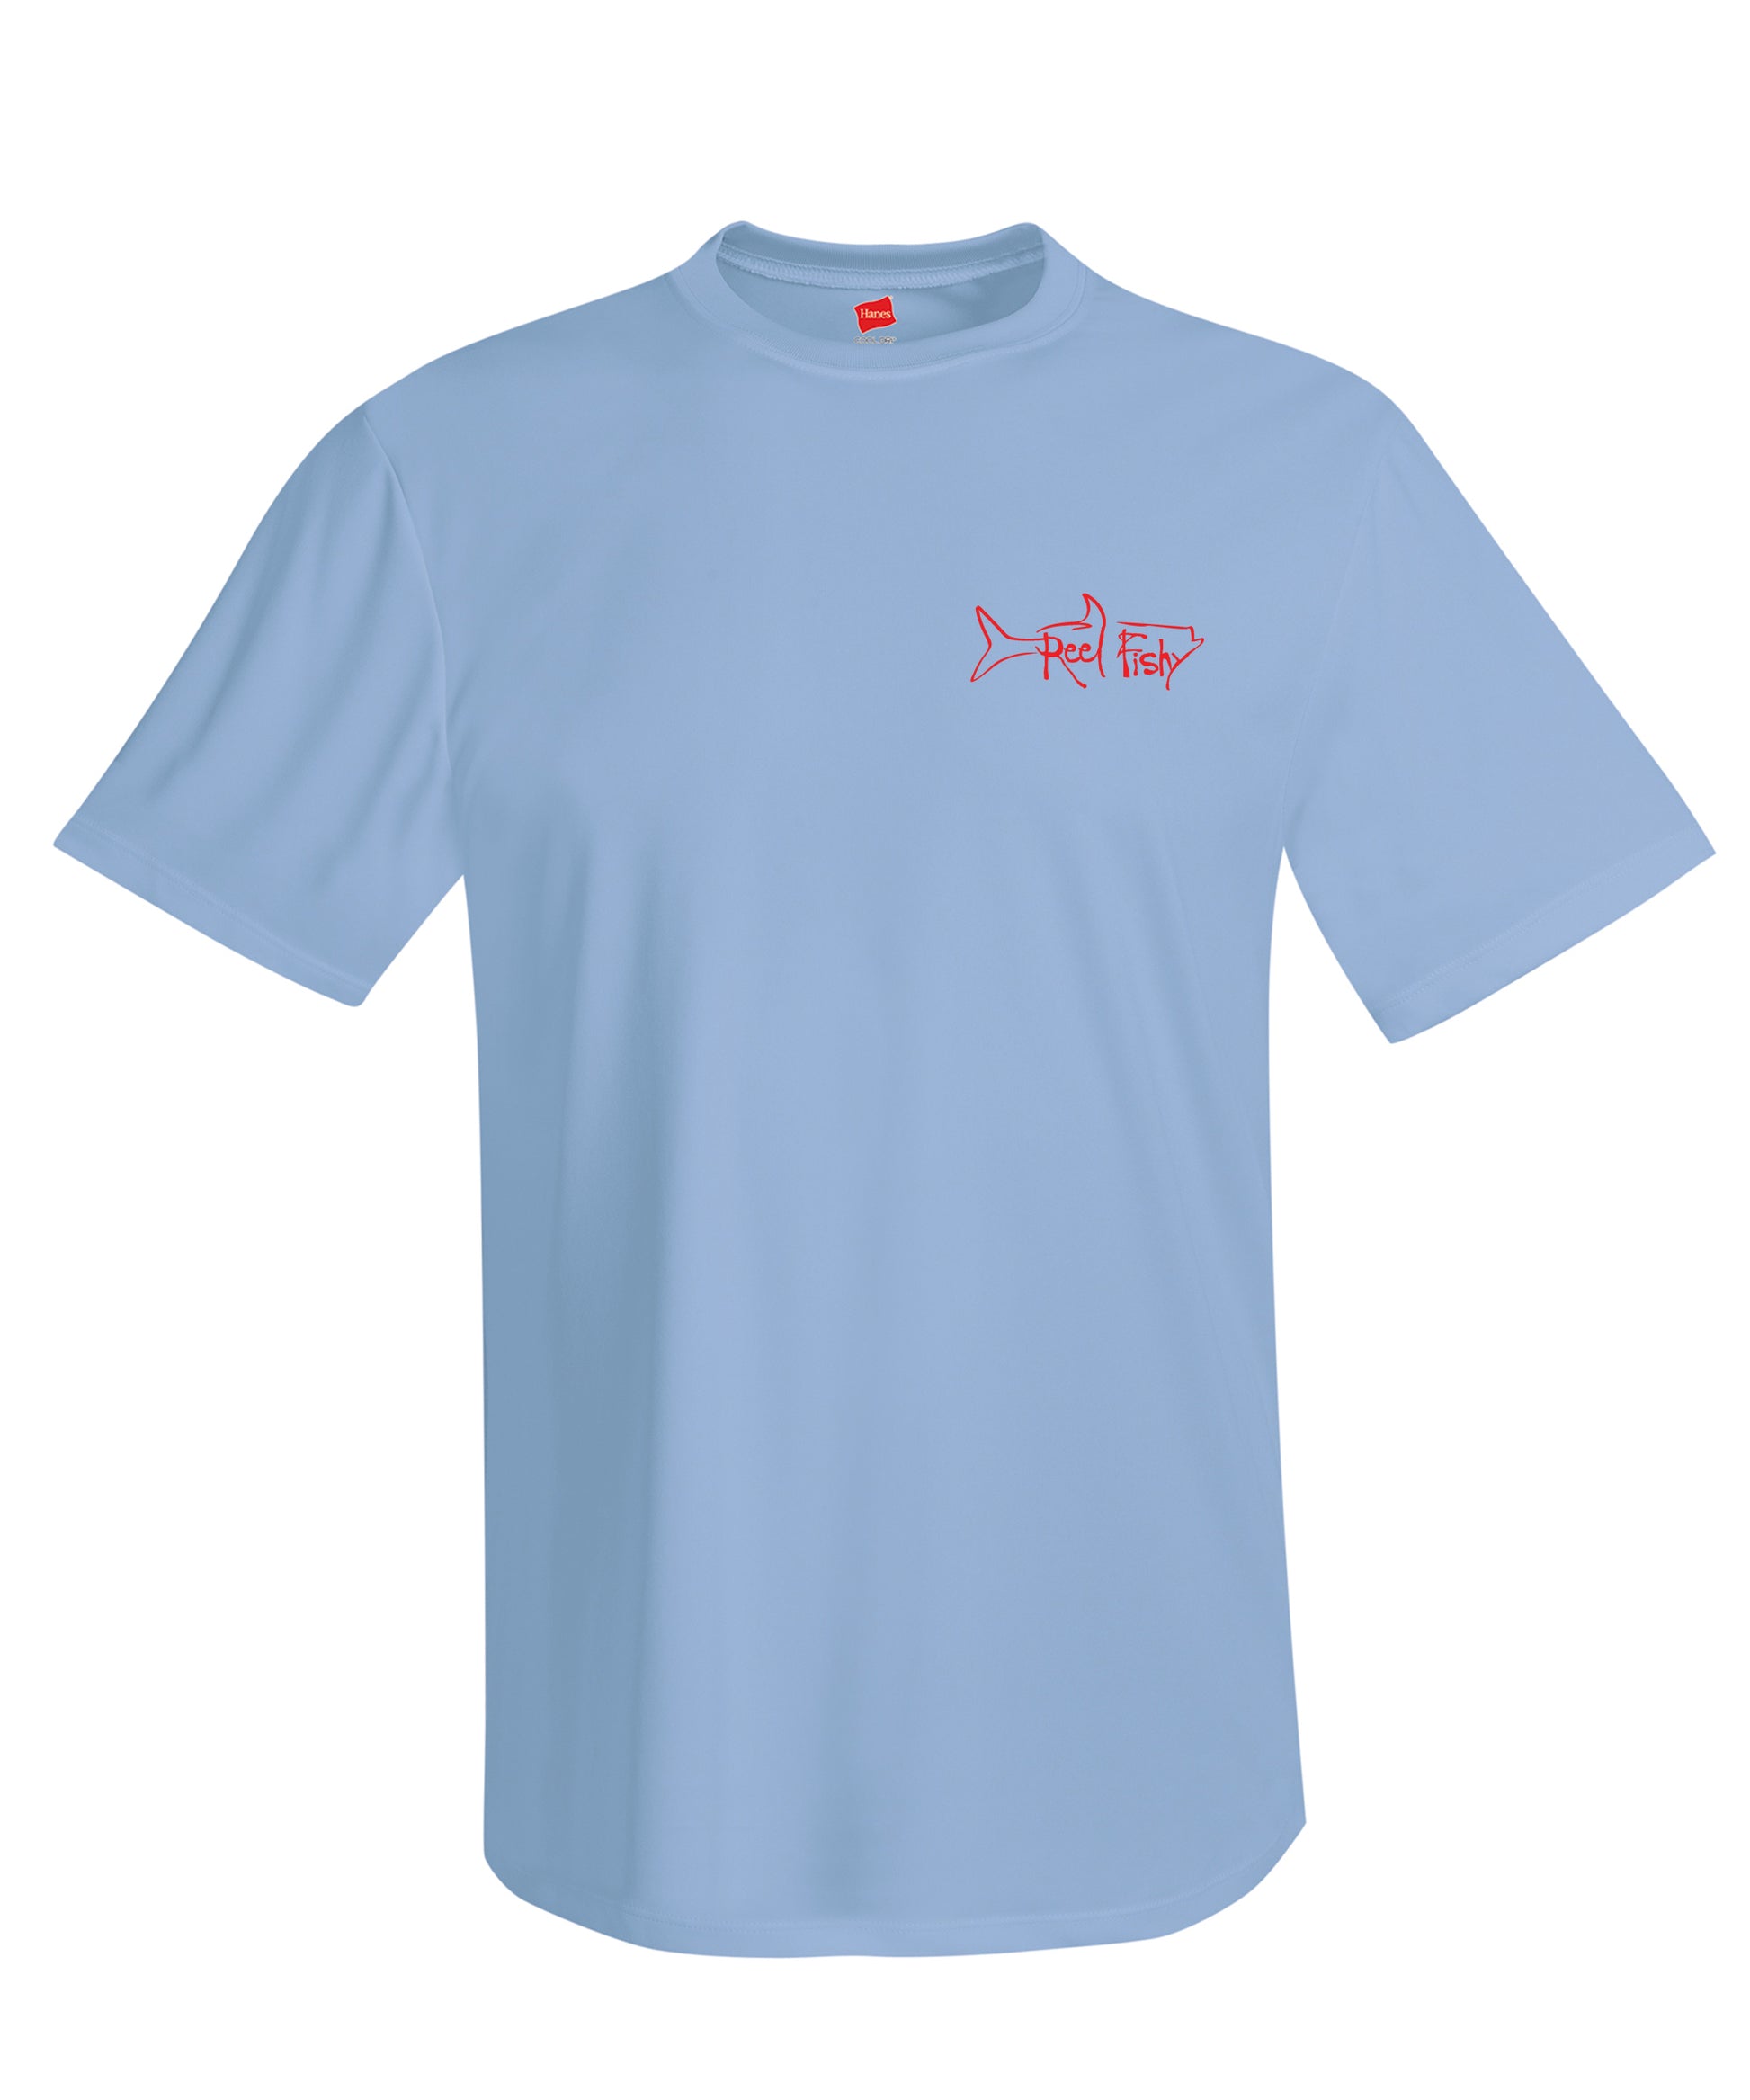 Lobster Performance Dry-Fit Fishing shirts with Sun Protection - "Bug Tickler" Dive Logo - Lt. Blue Short Sleeve (Reel Fishy Tarpon Logo front)